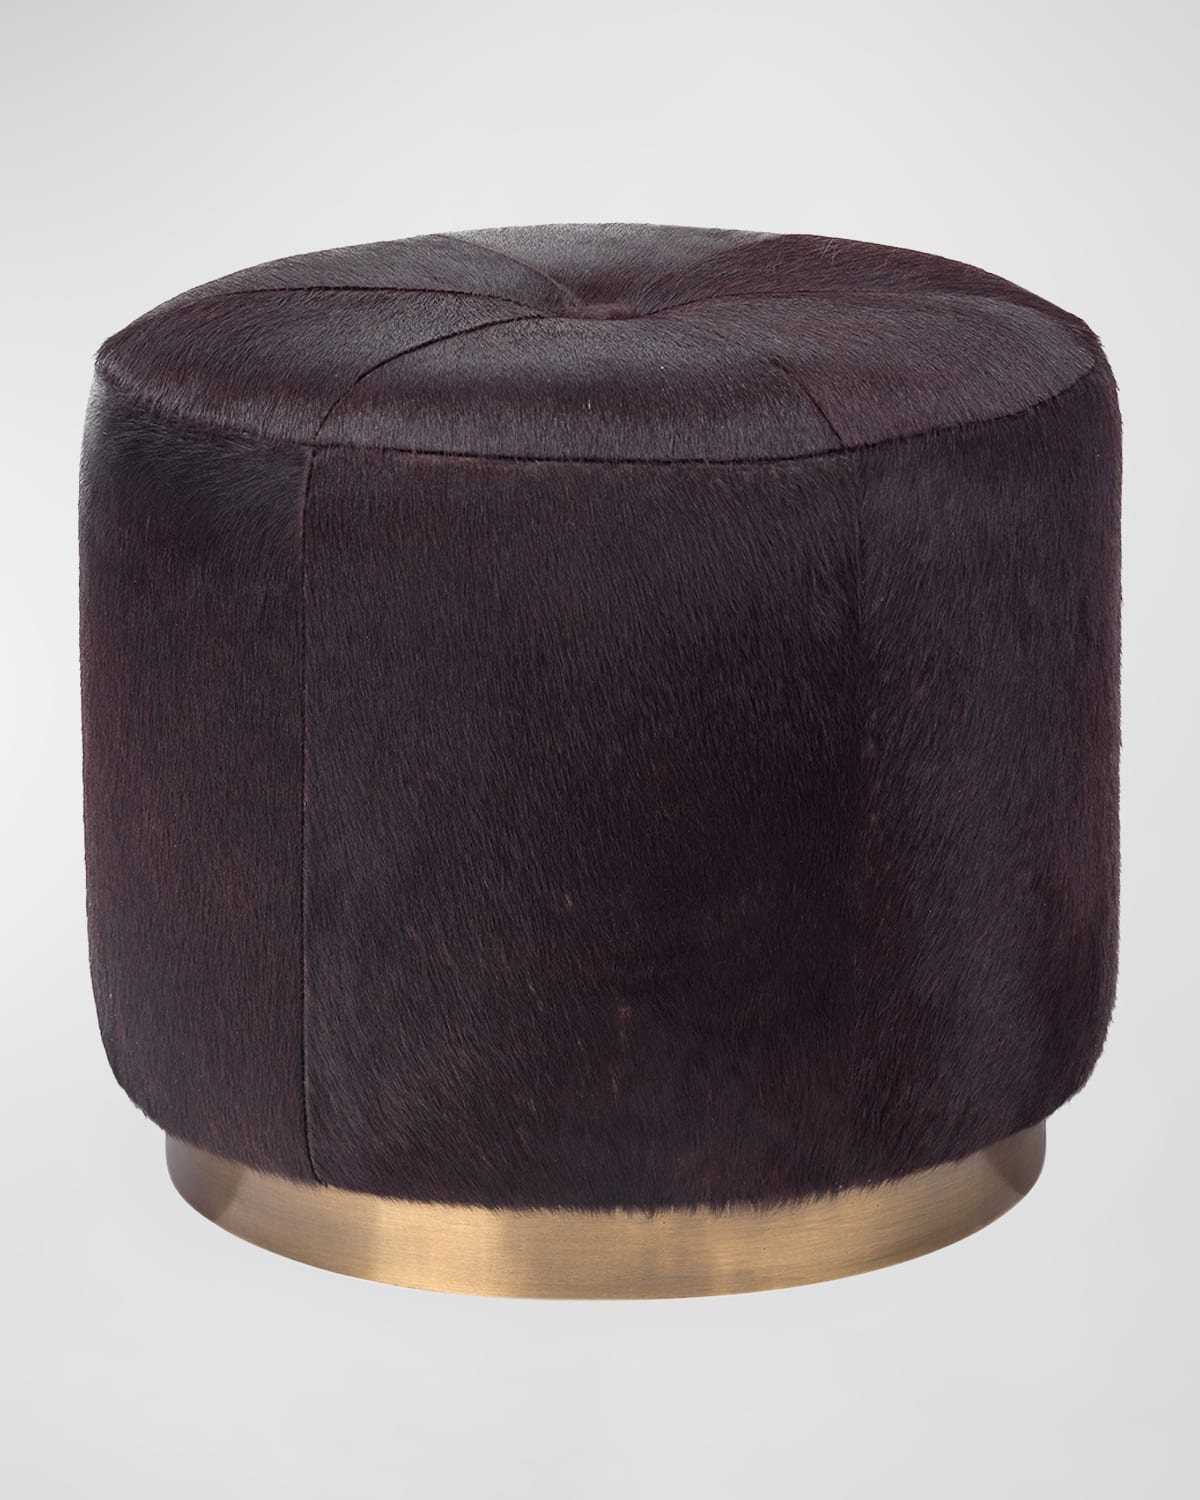 JAMIE YOUNG THACKERY SMALL ROUND HIDE POUF